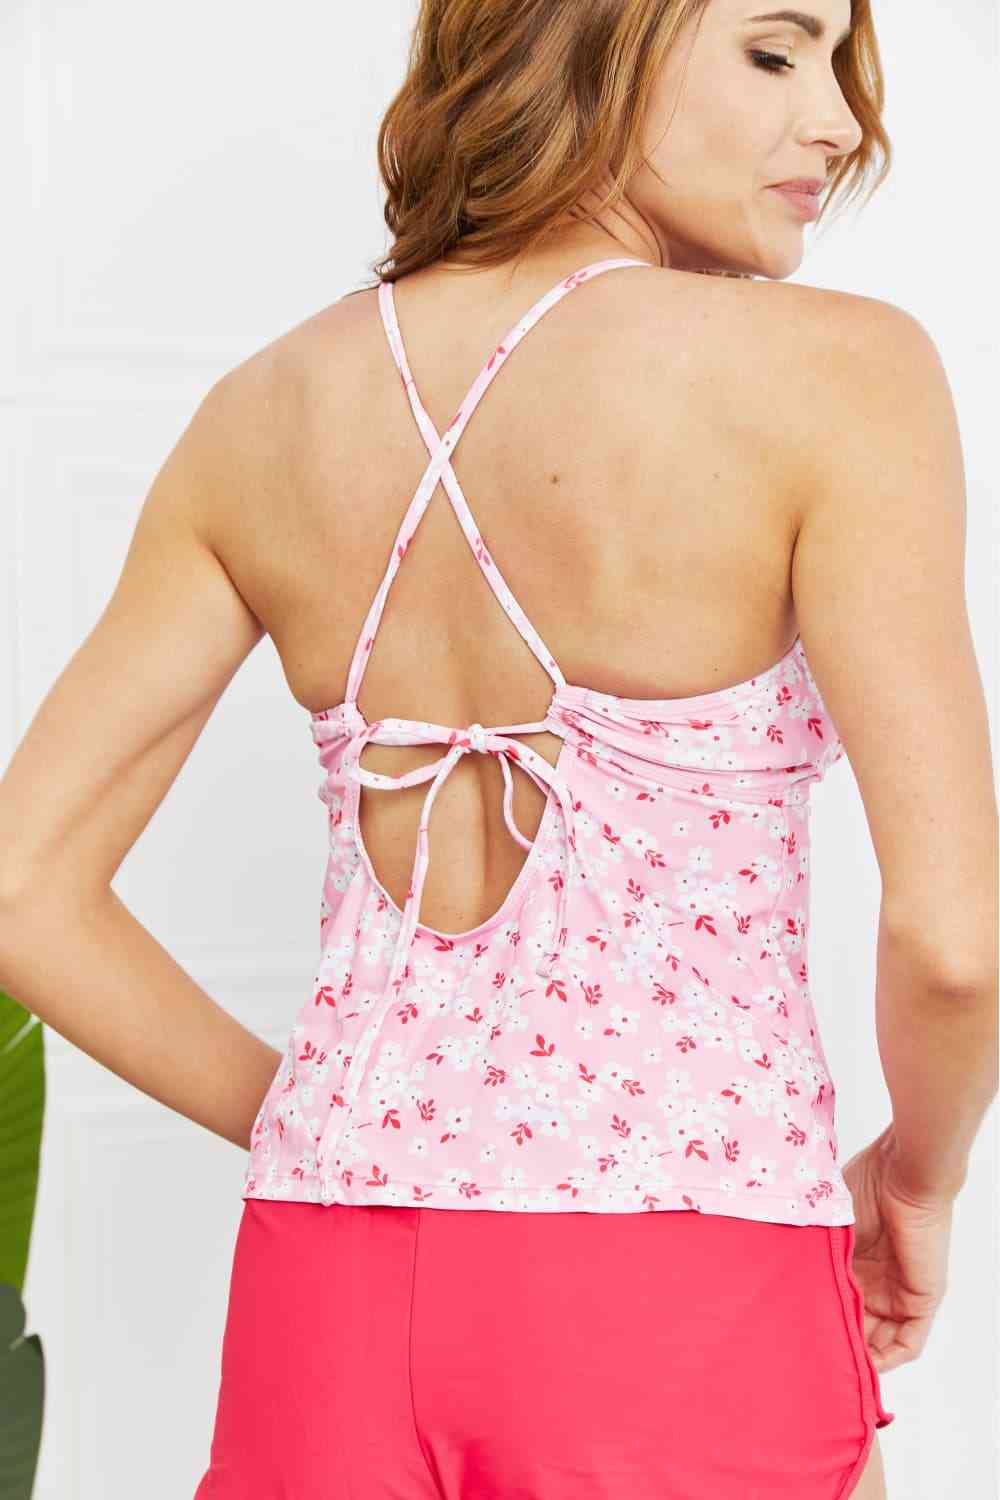 By The Shore Full Size Two-Piece Swimsuit in Blossom Pink - Kawaii Stop - Adjustable Straps, Beachwear, Blossom Pink, Floral Pattern, High Waist Shorts, Marina West Swim, Marina West Swim Fashion, Removable Bra Pads, Ship from USA, Tankini Top, Two-Piece Swimsuit